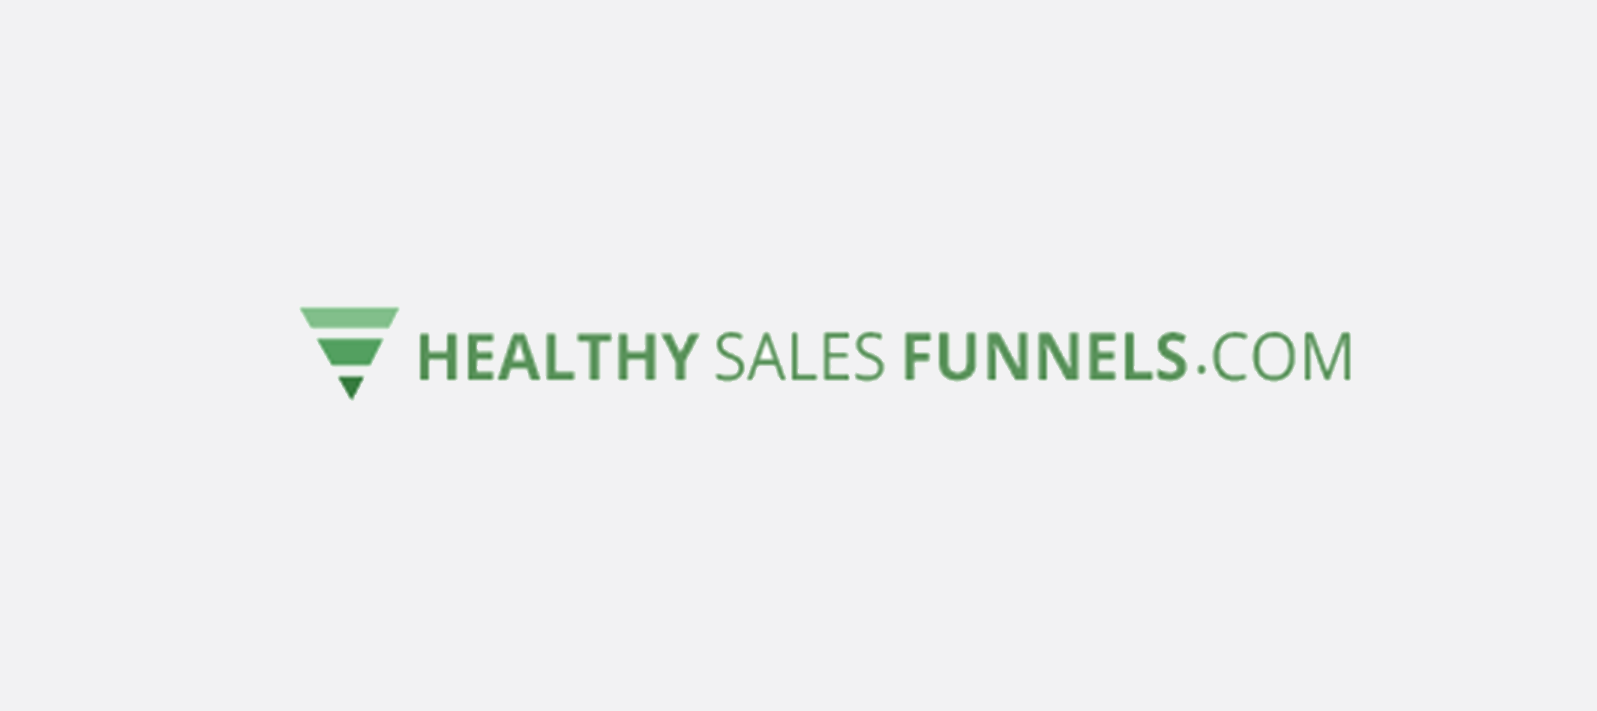 Healthysalesfunnels.png